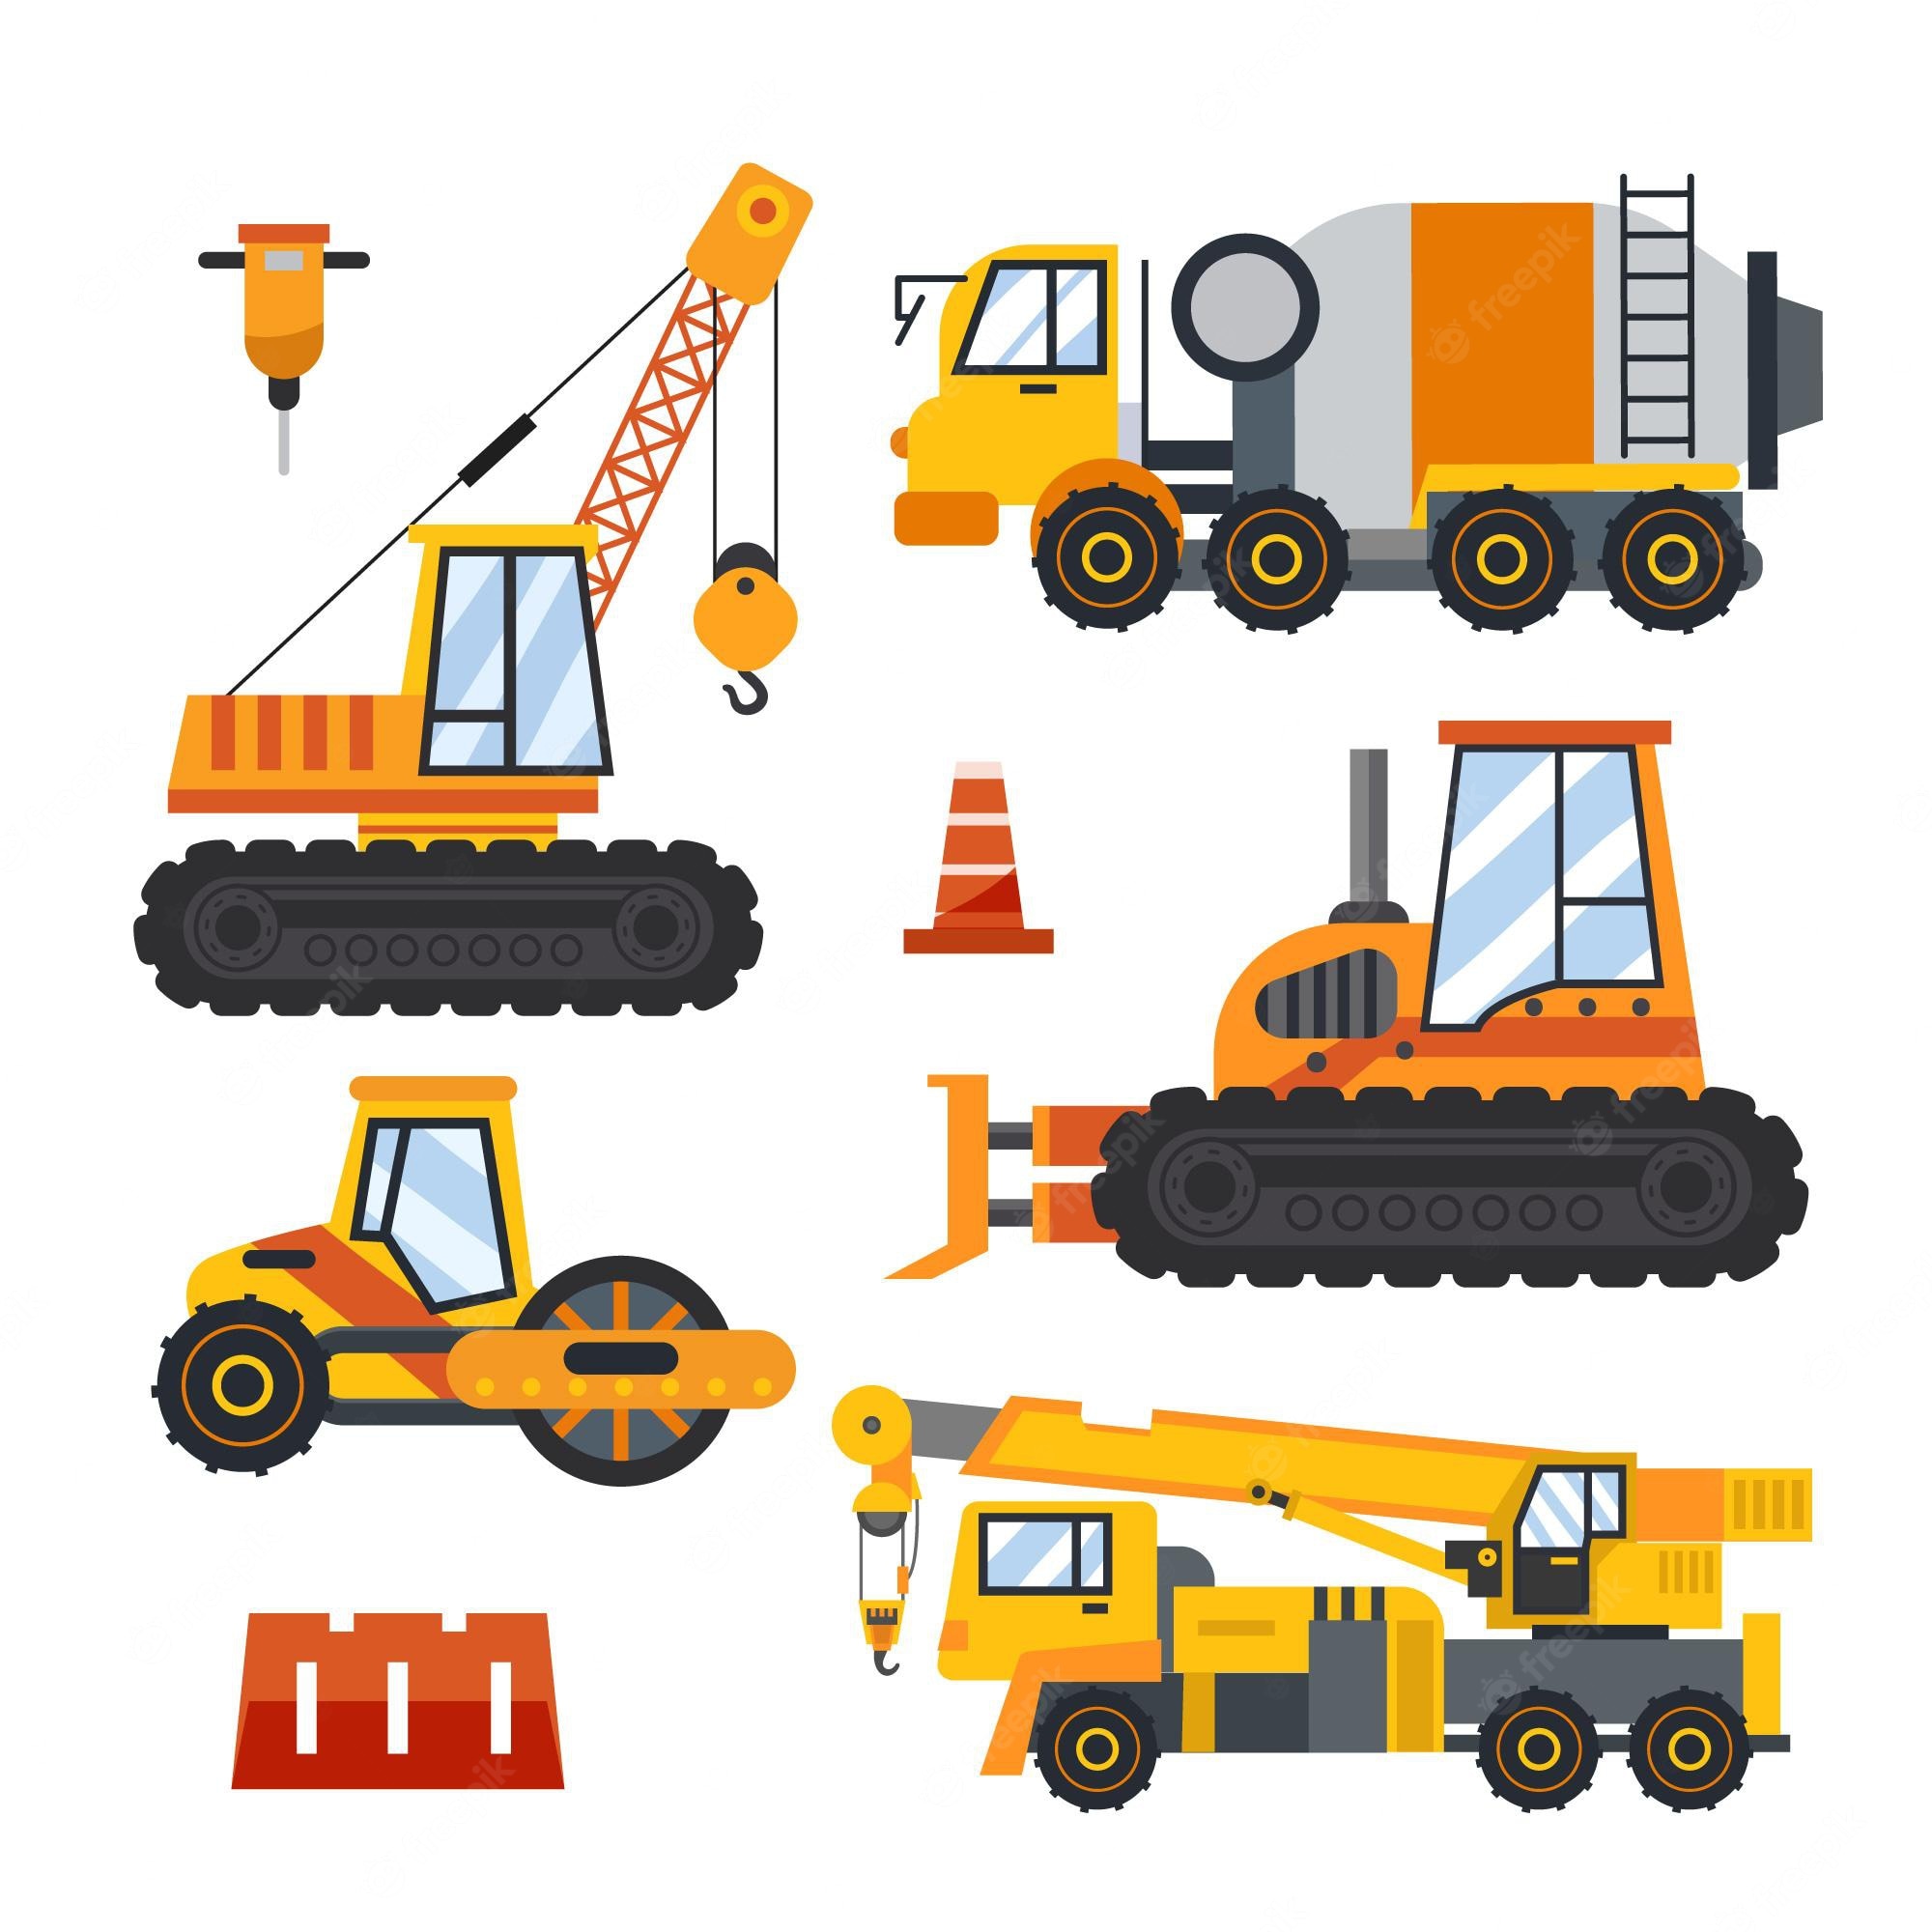 Construction Vehicles Clipart Graphic by magreenhouse · Creative ...